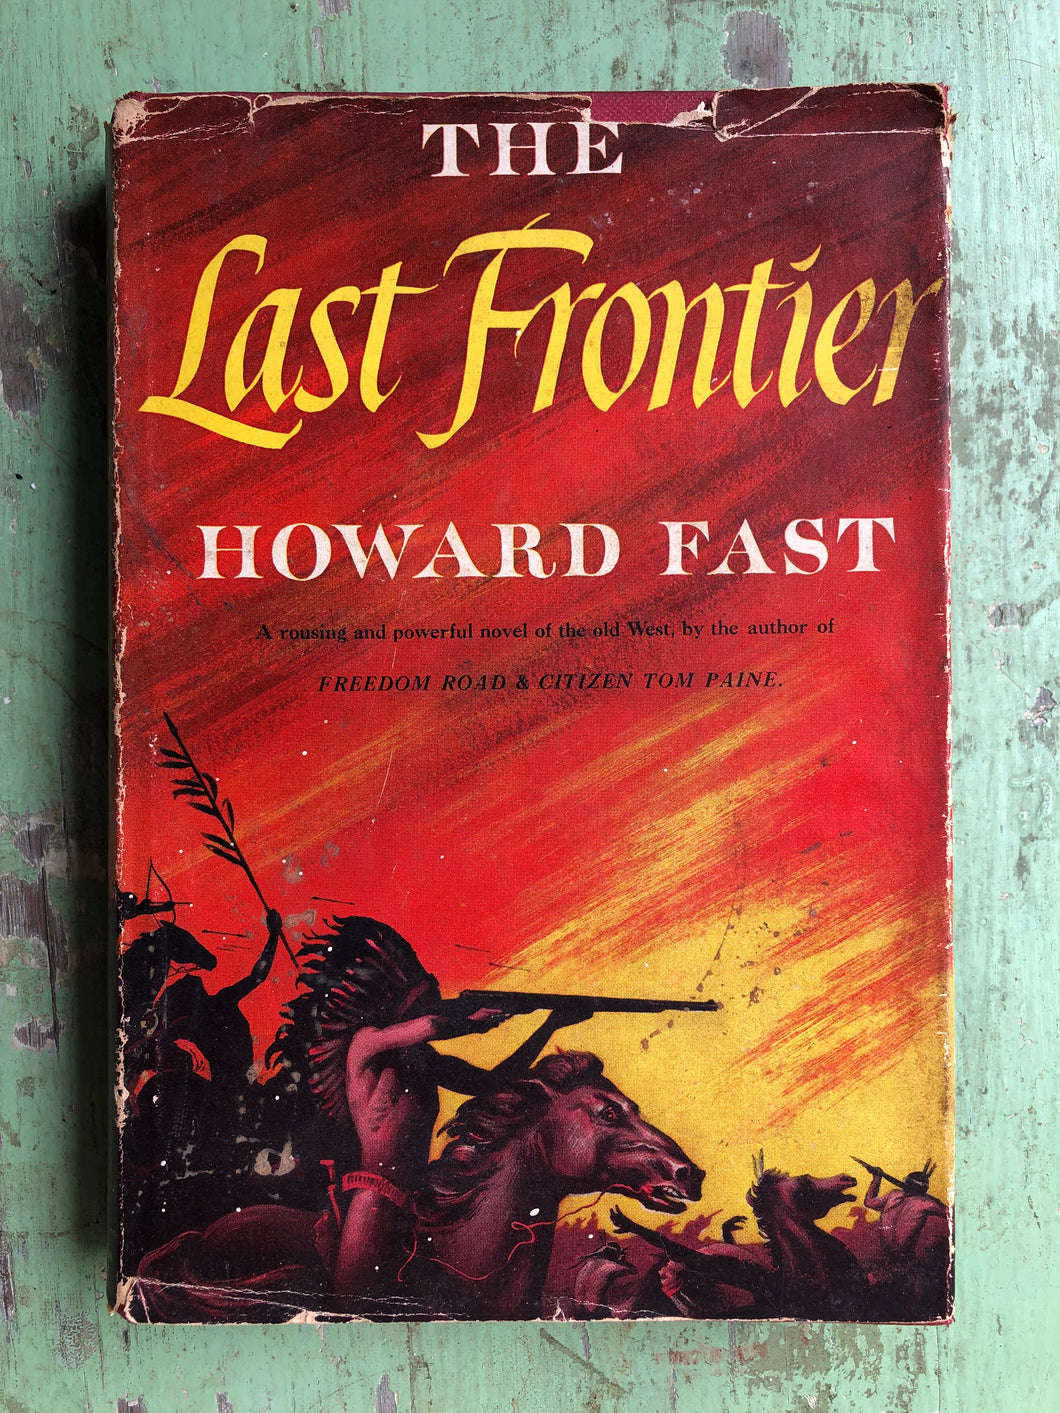 The Last Frontier by Howard Fast